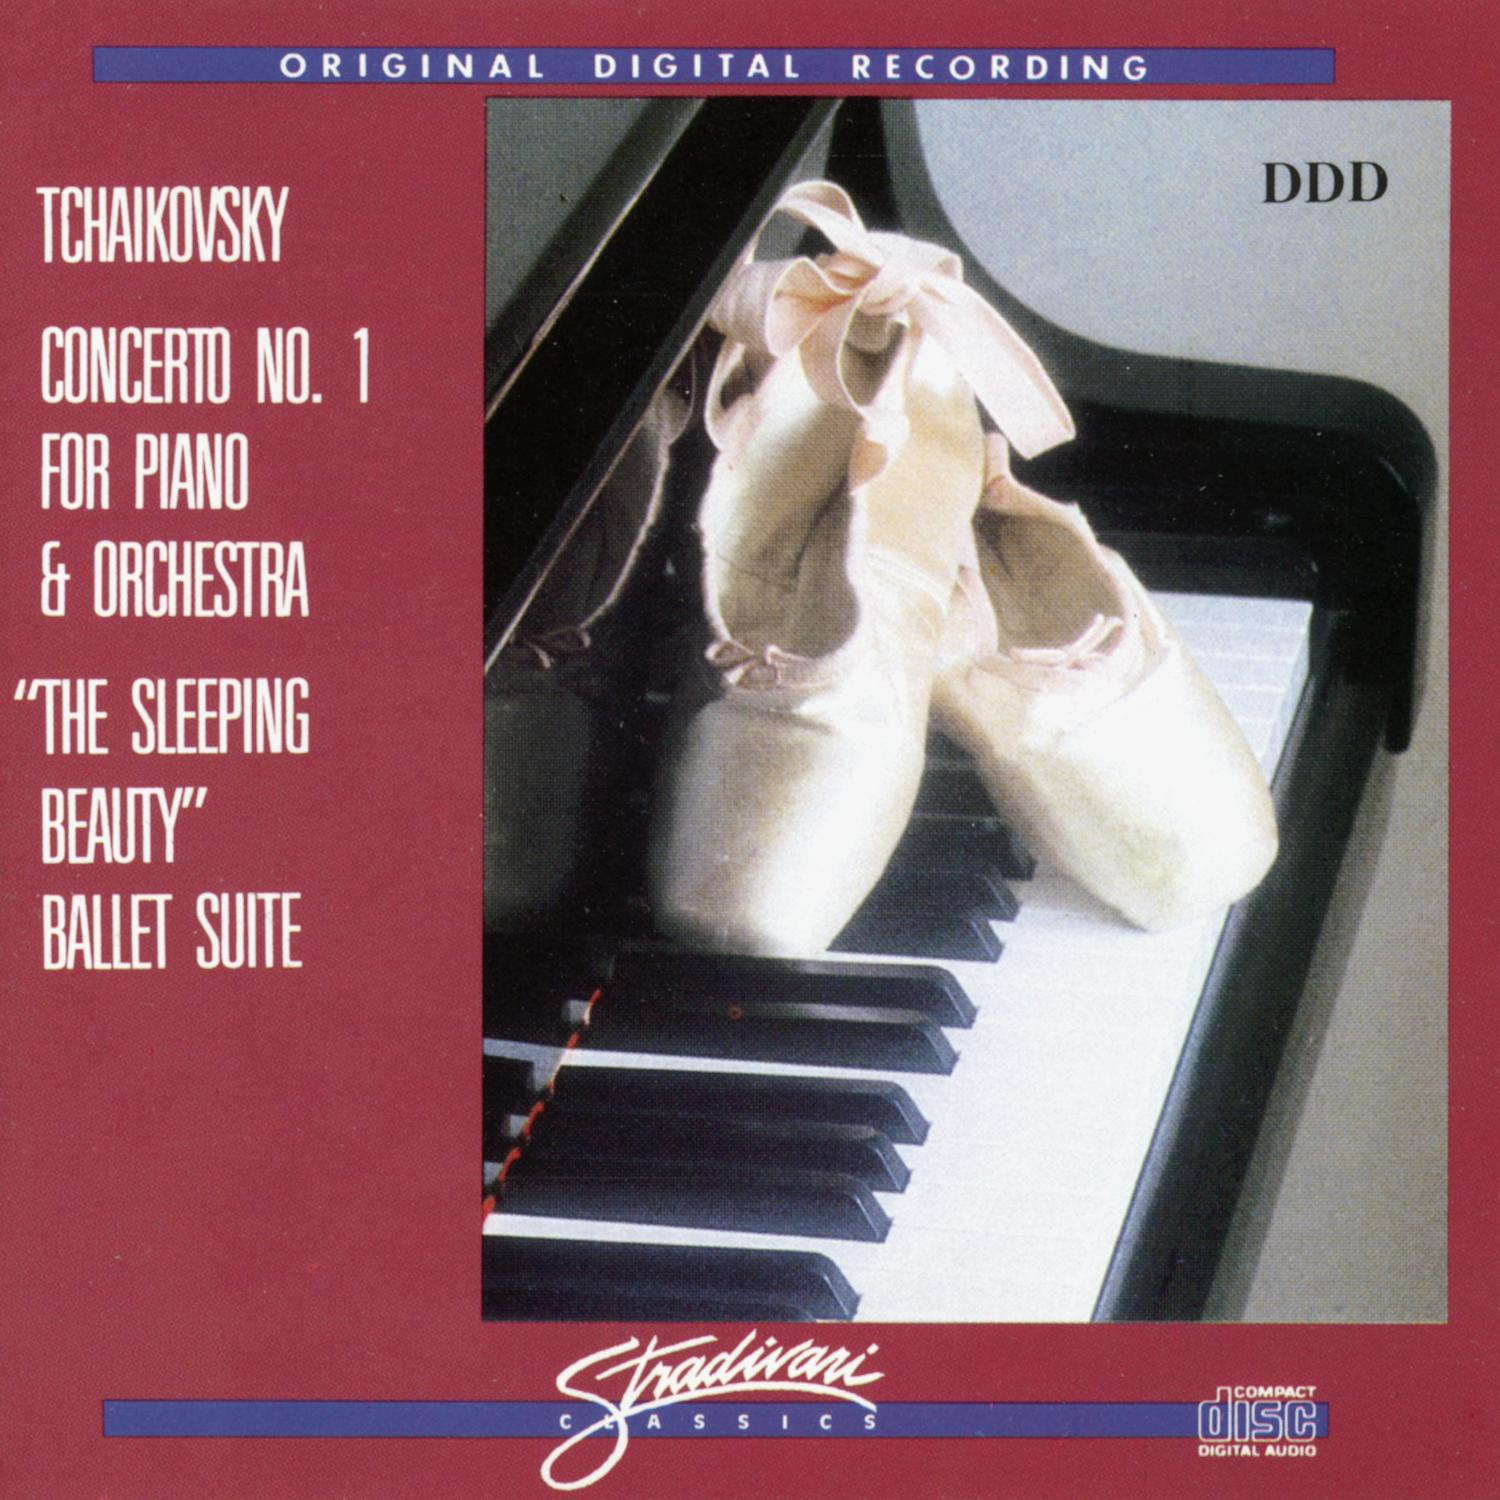 Concerto No 1 For Piano & Orchestra, The Sleeping Beauty Ballet Suite